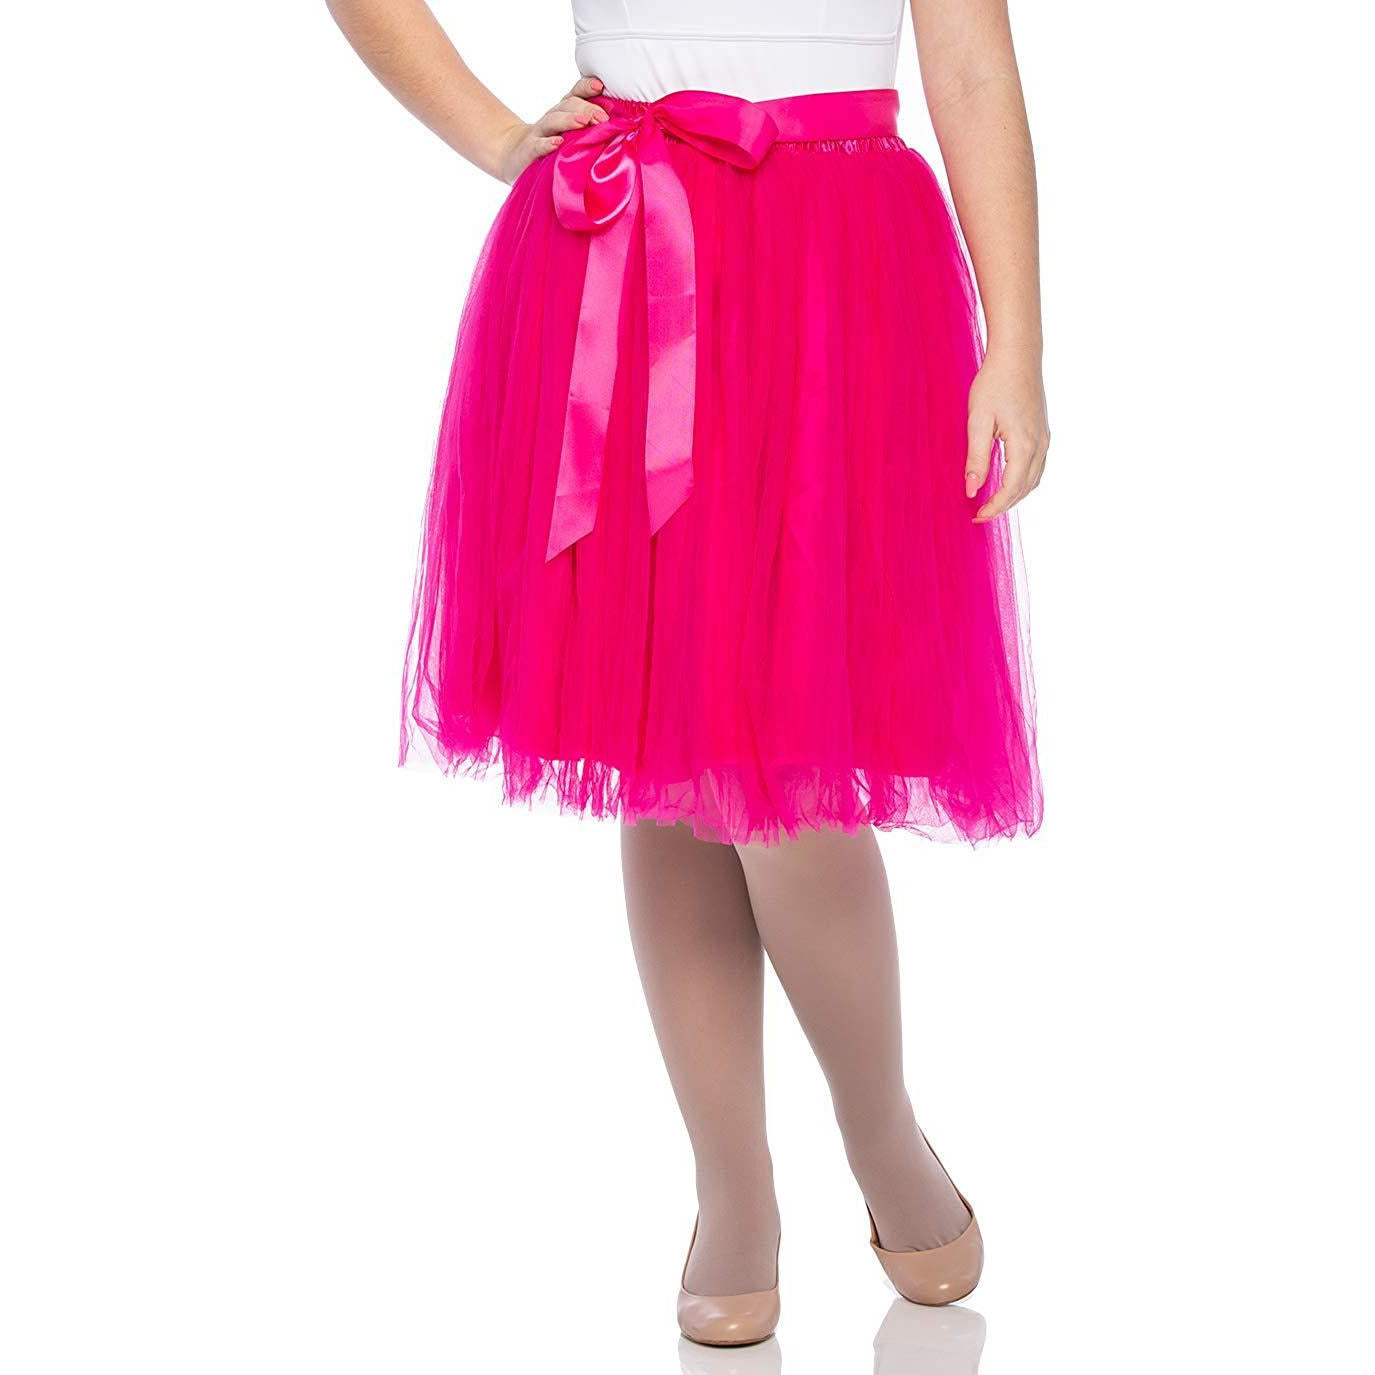 Adults & Girls A-line Knee Length Tutu Tulle Skirt - Regular and Plus Size in hot Pink